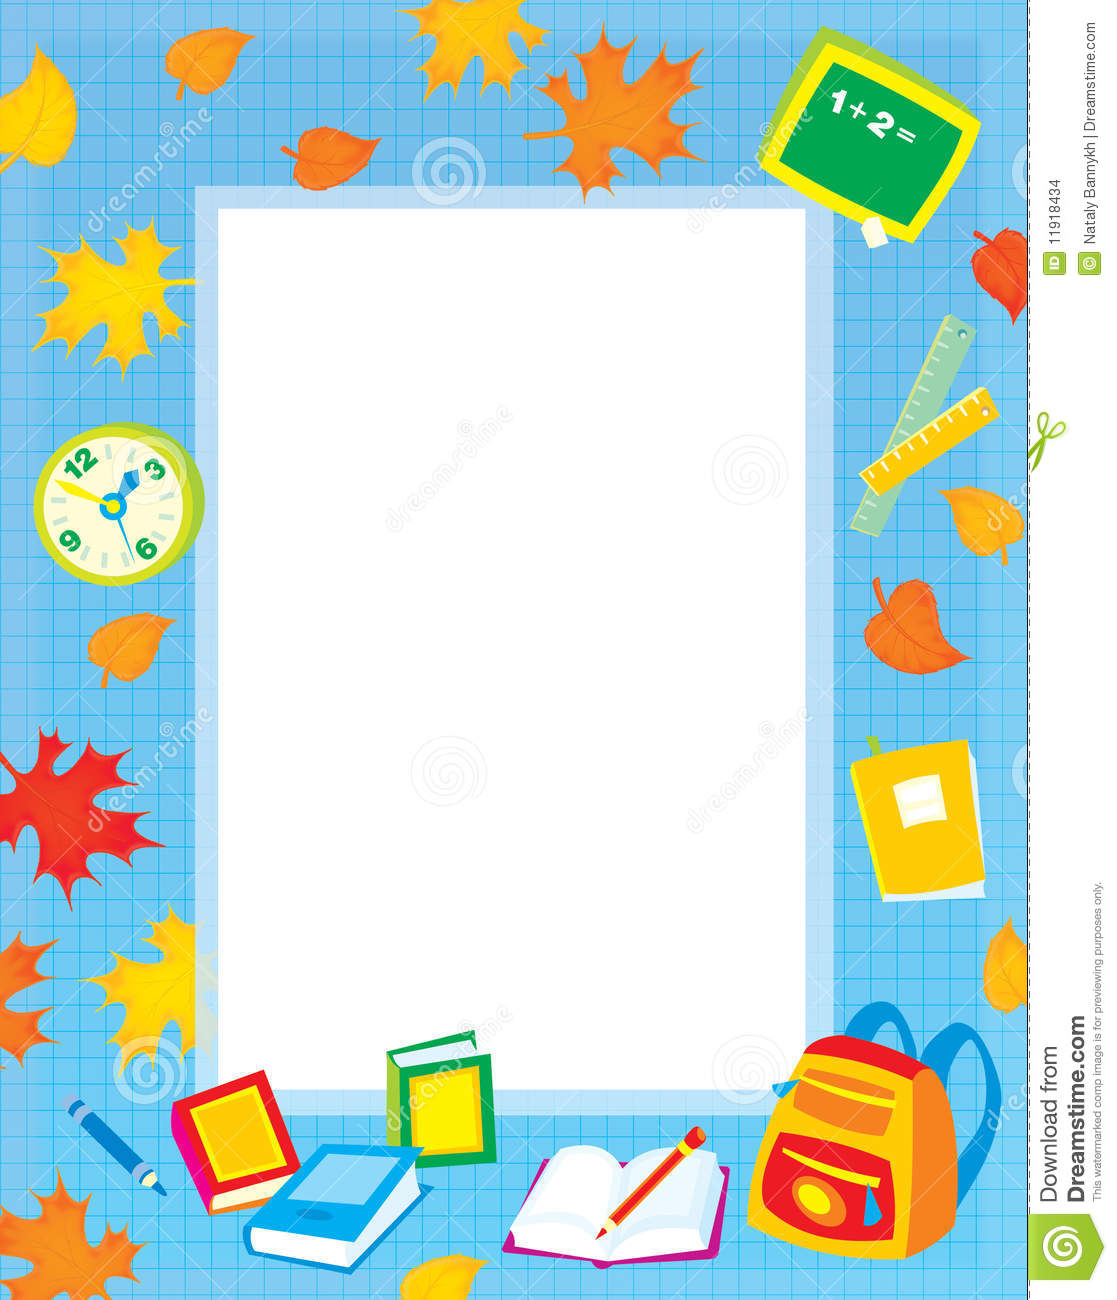 Images For > Borders And Frames For School